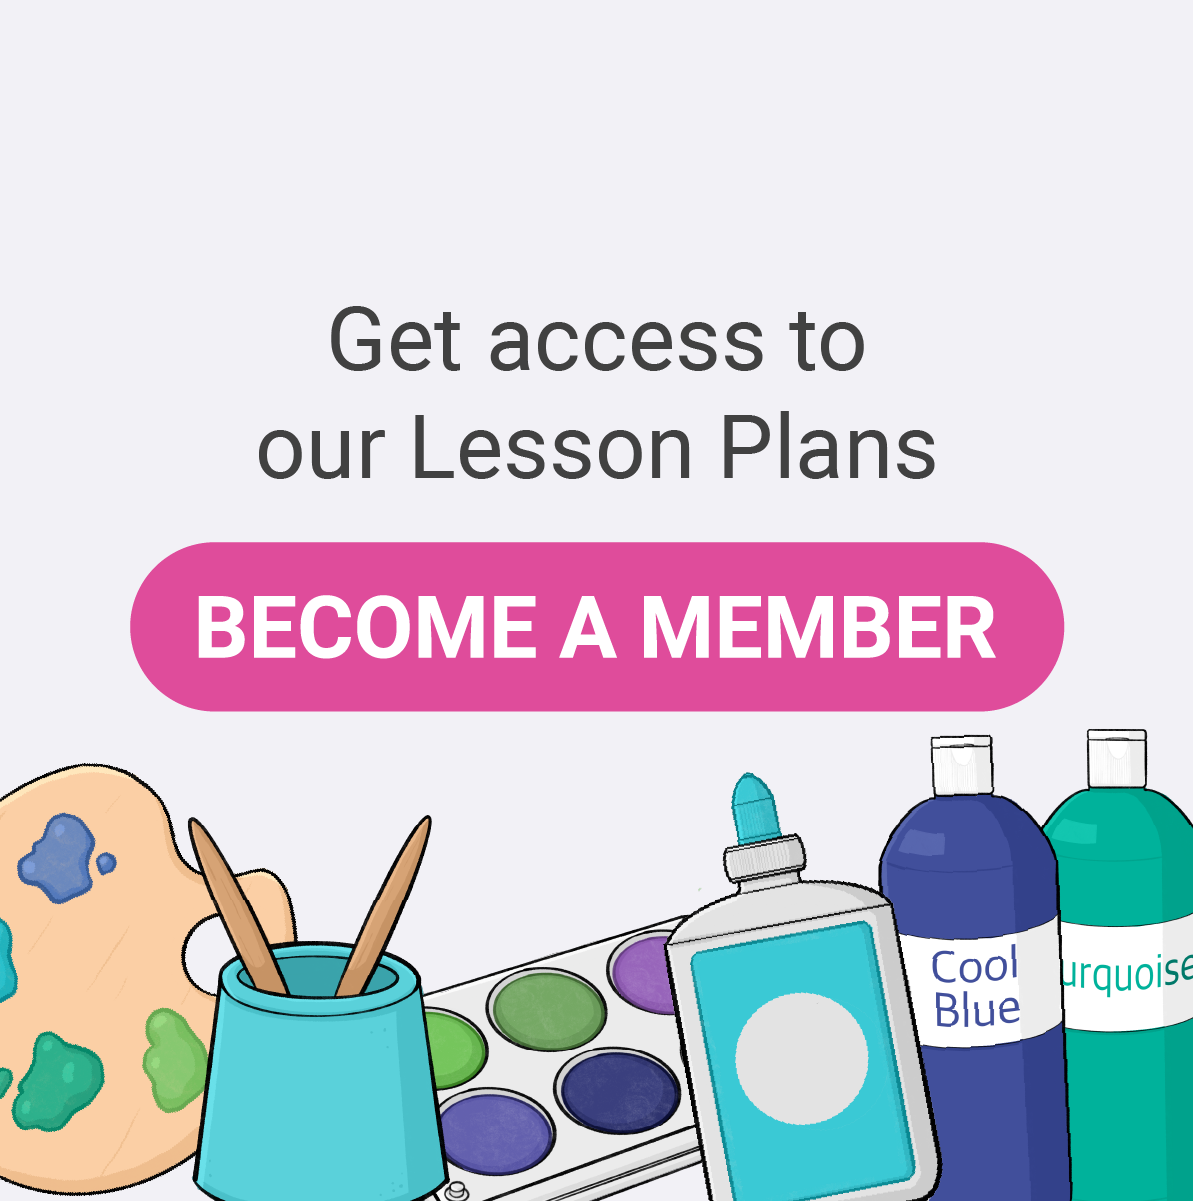 Get access to our lesson plans, click here and become a member